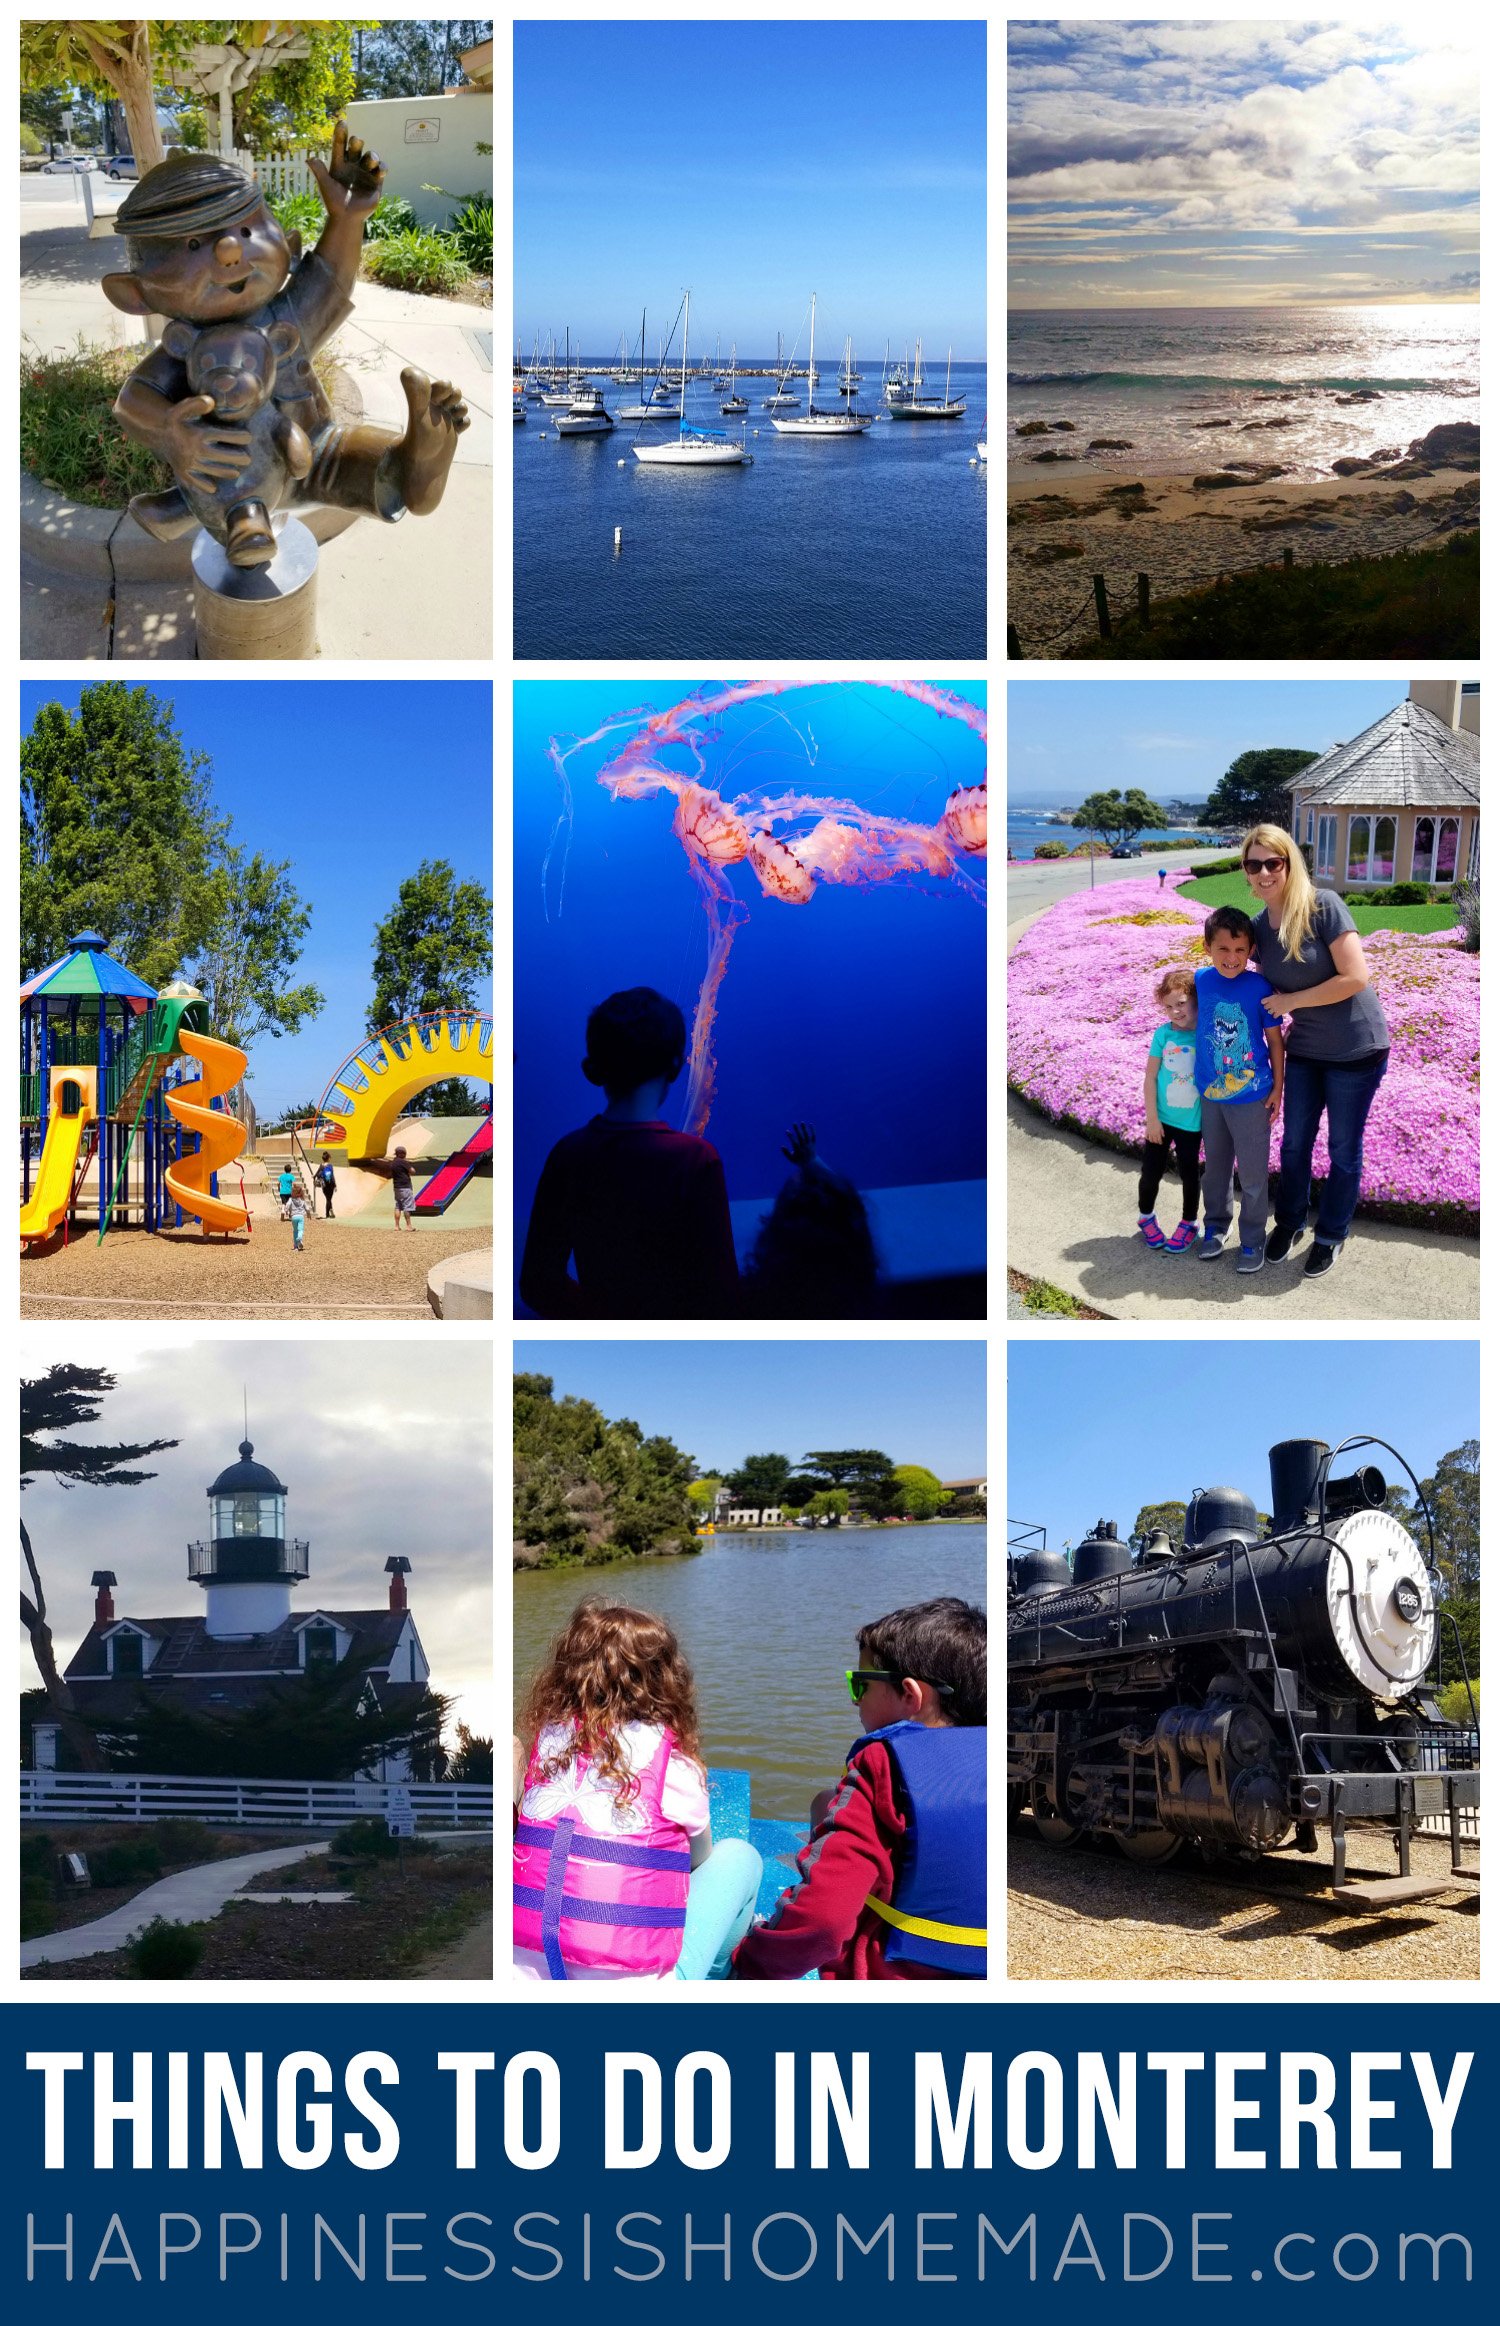 11 Family-Friendly Things to Do in Monterey